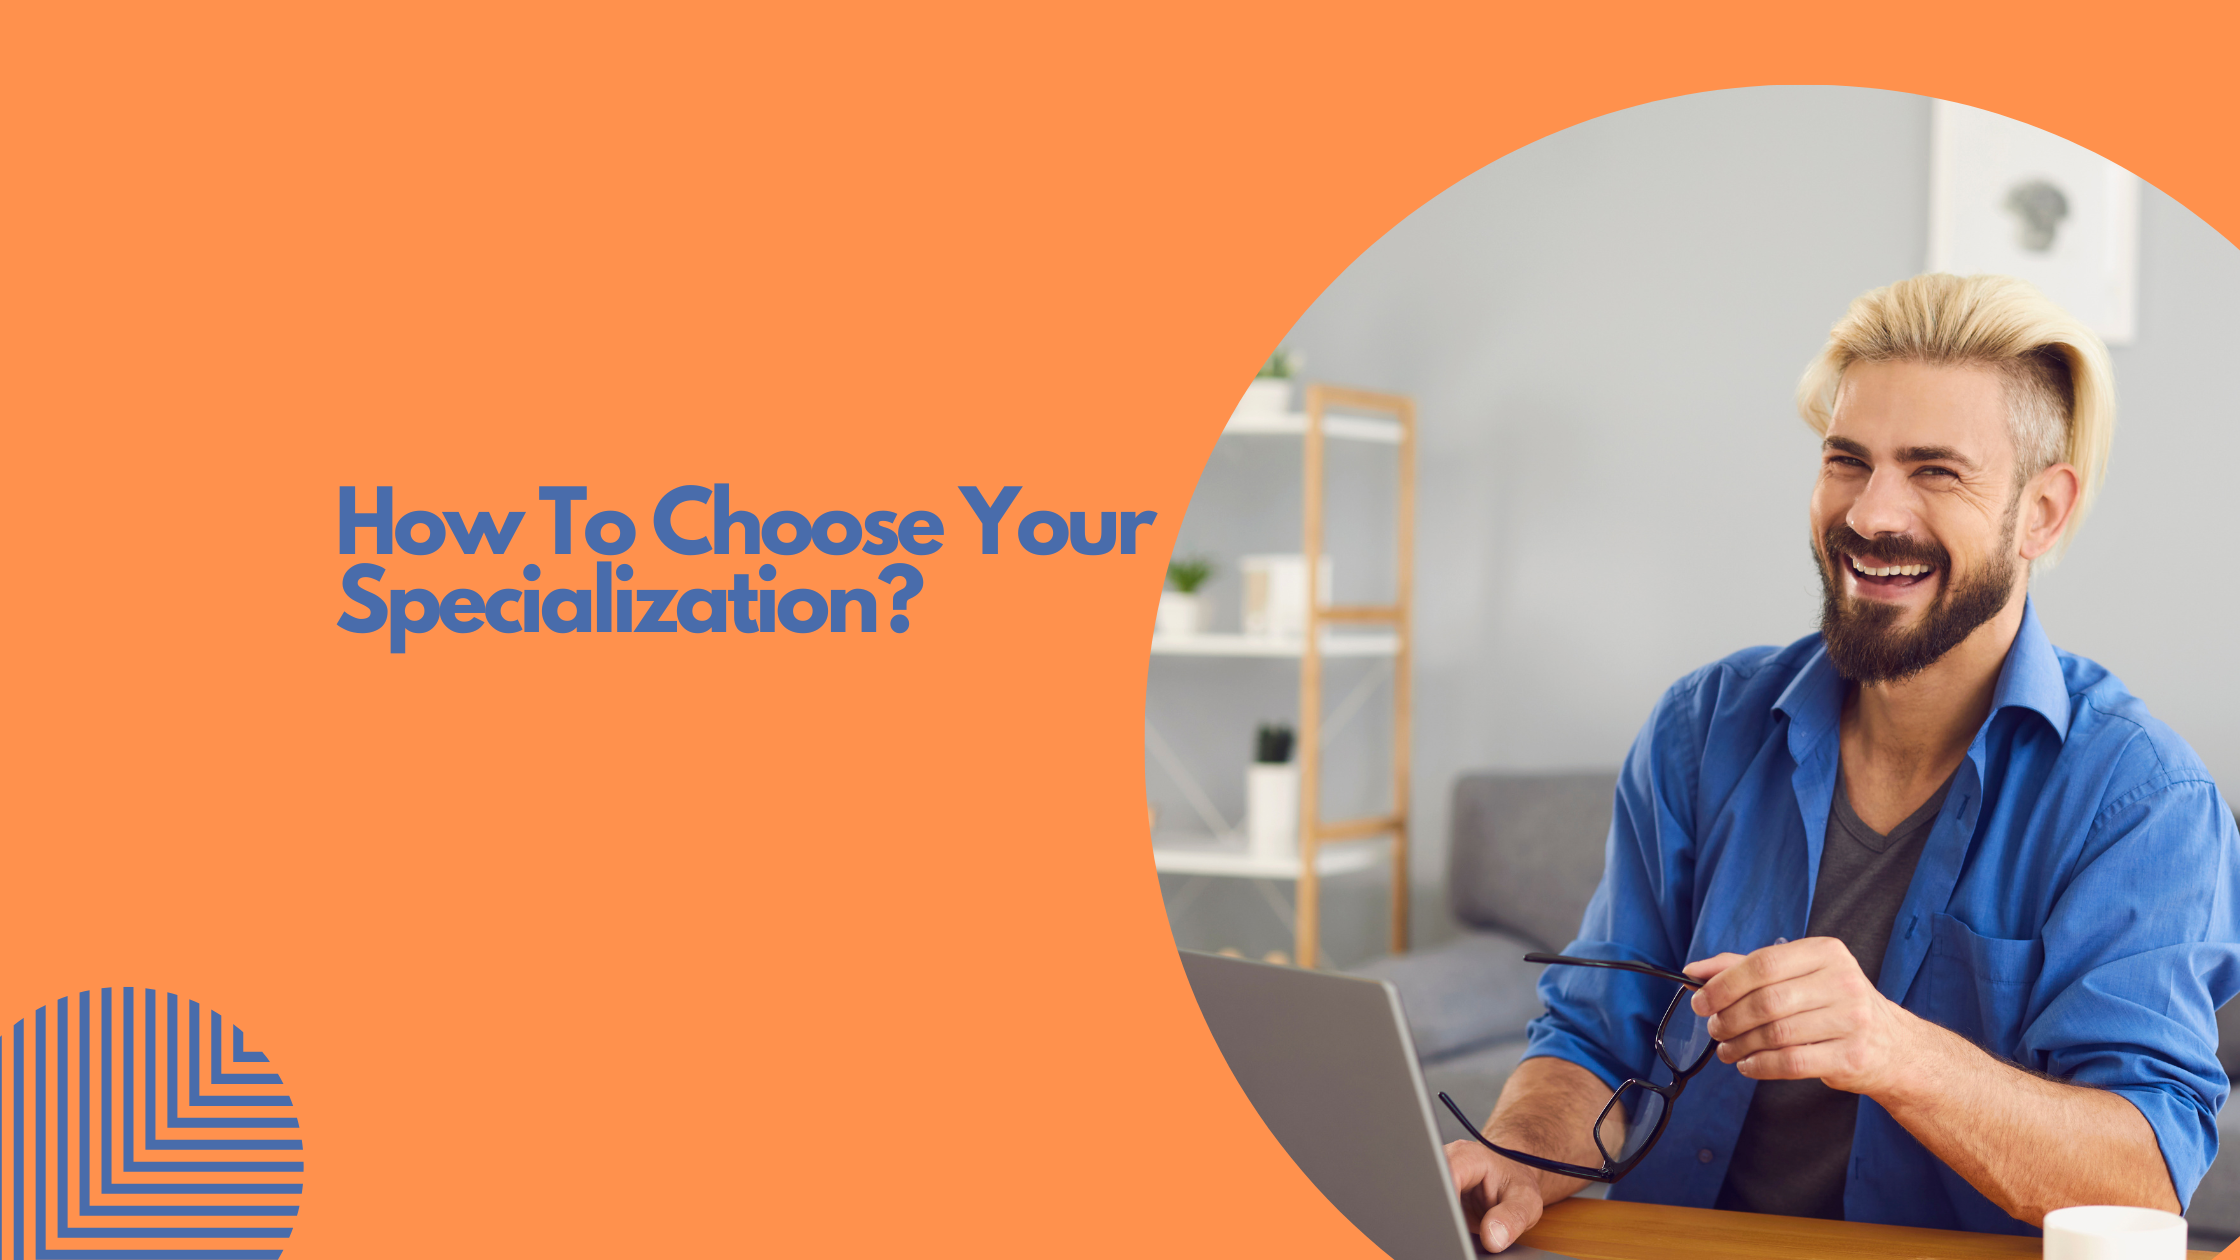 How To Choose Your Specialization?